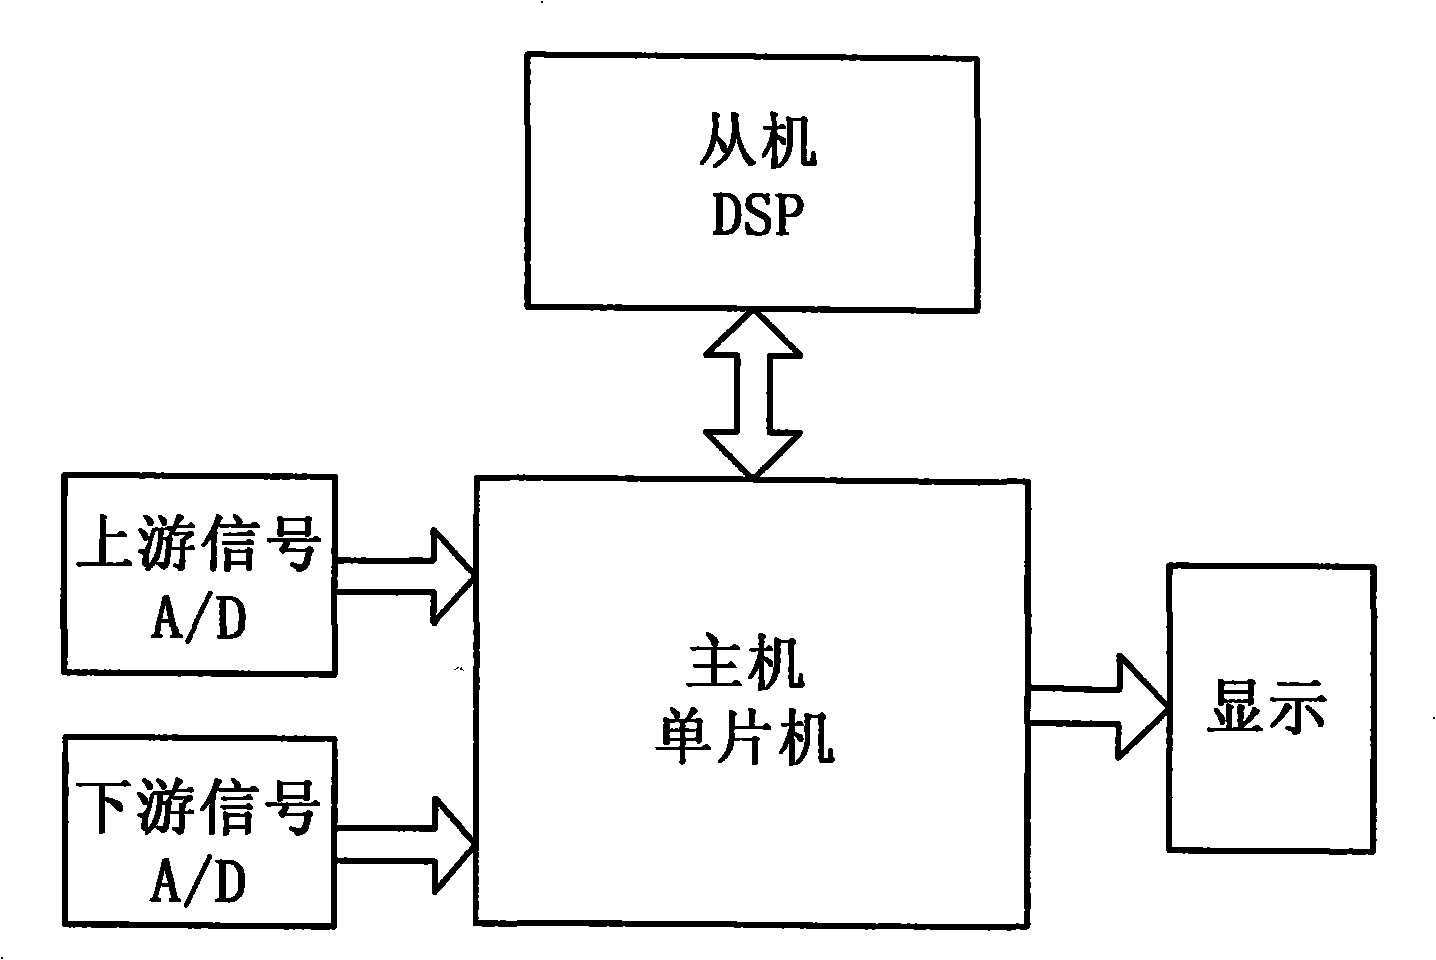 Dual inside-and-outside ring capacitance sensor and two-phase flow speed related measuring system